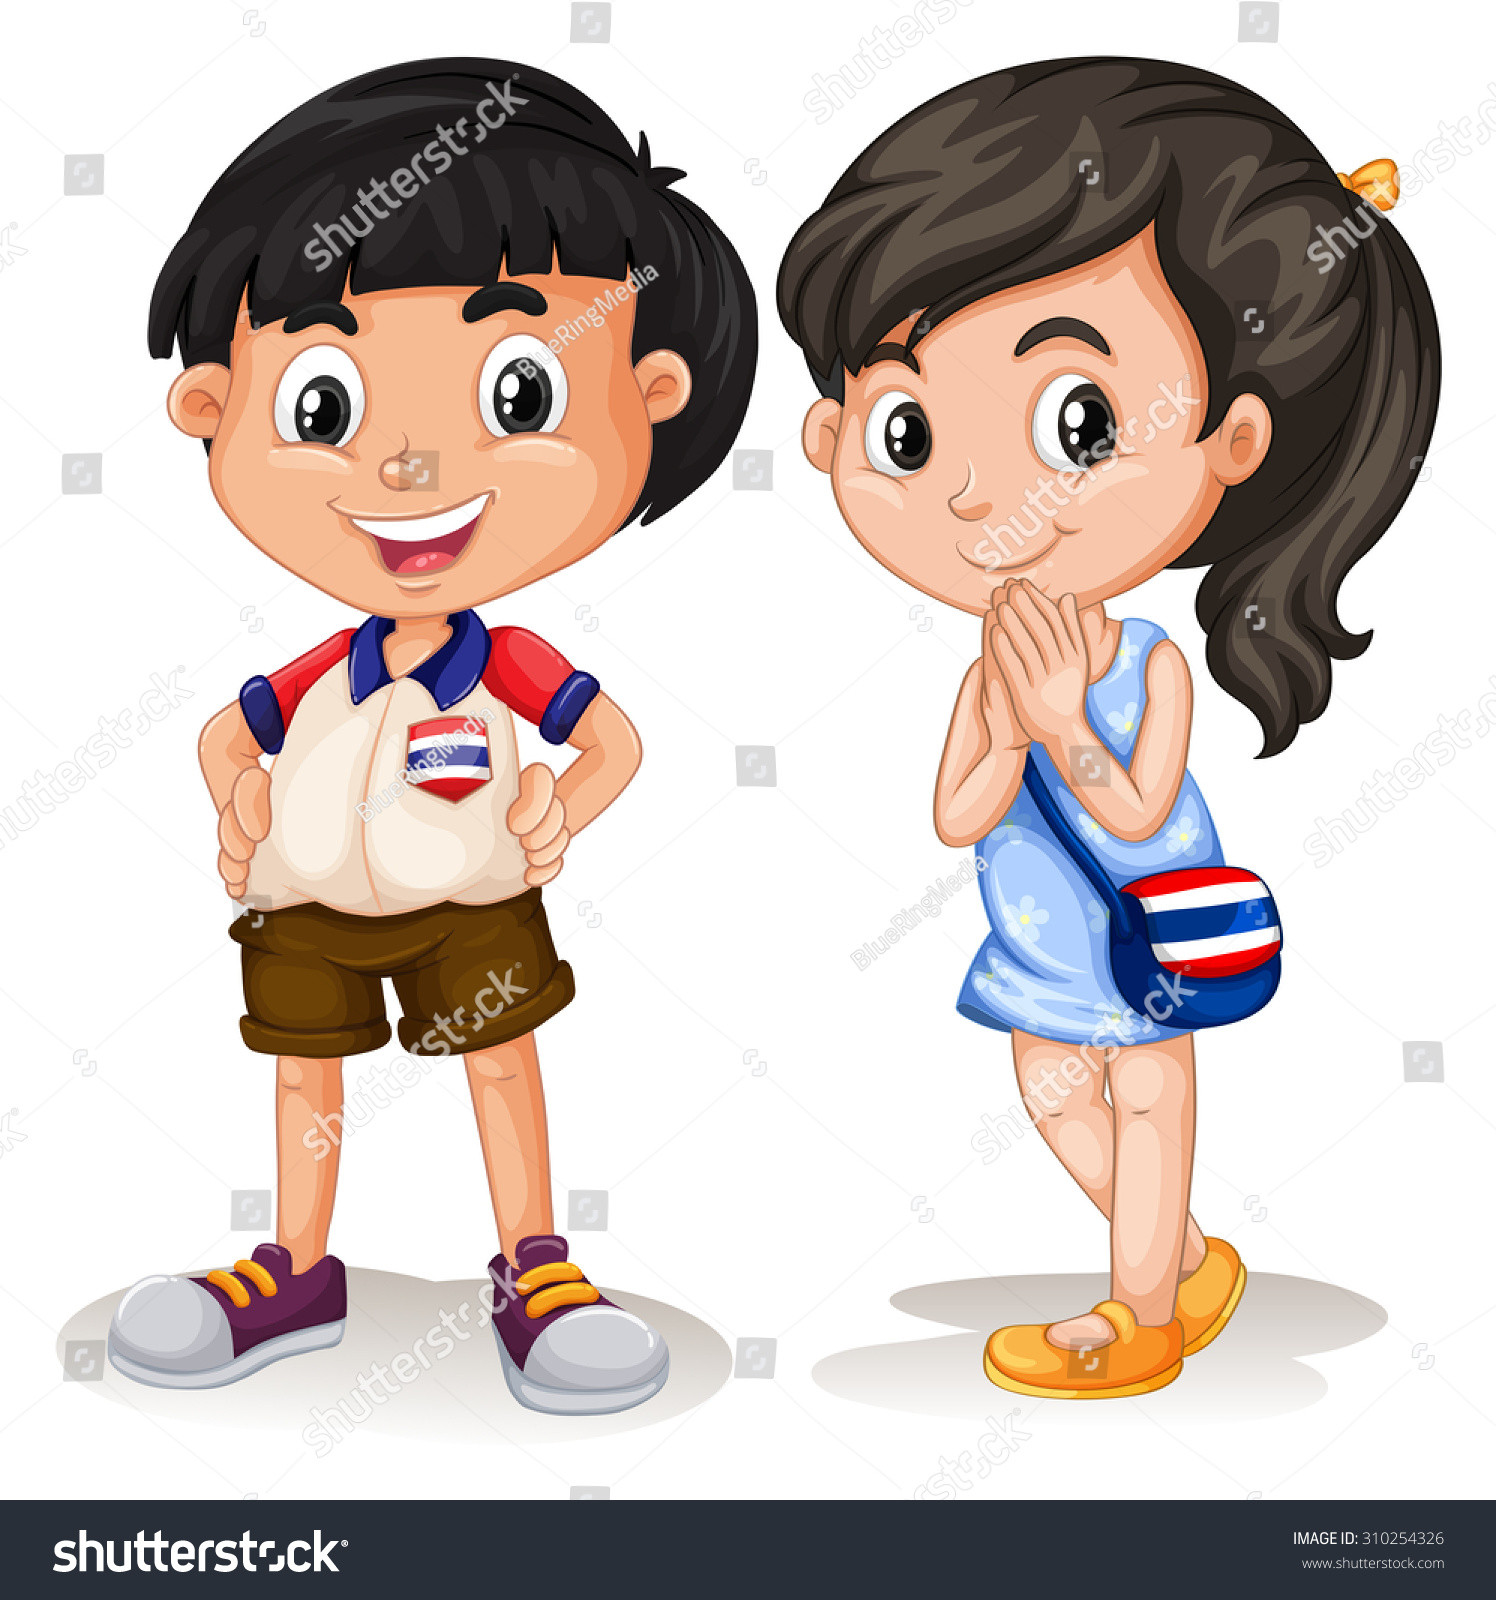 clipart of a boy and a girl - photo #24